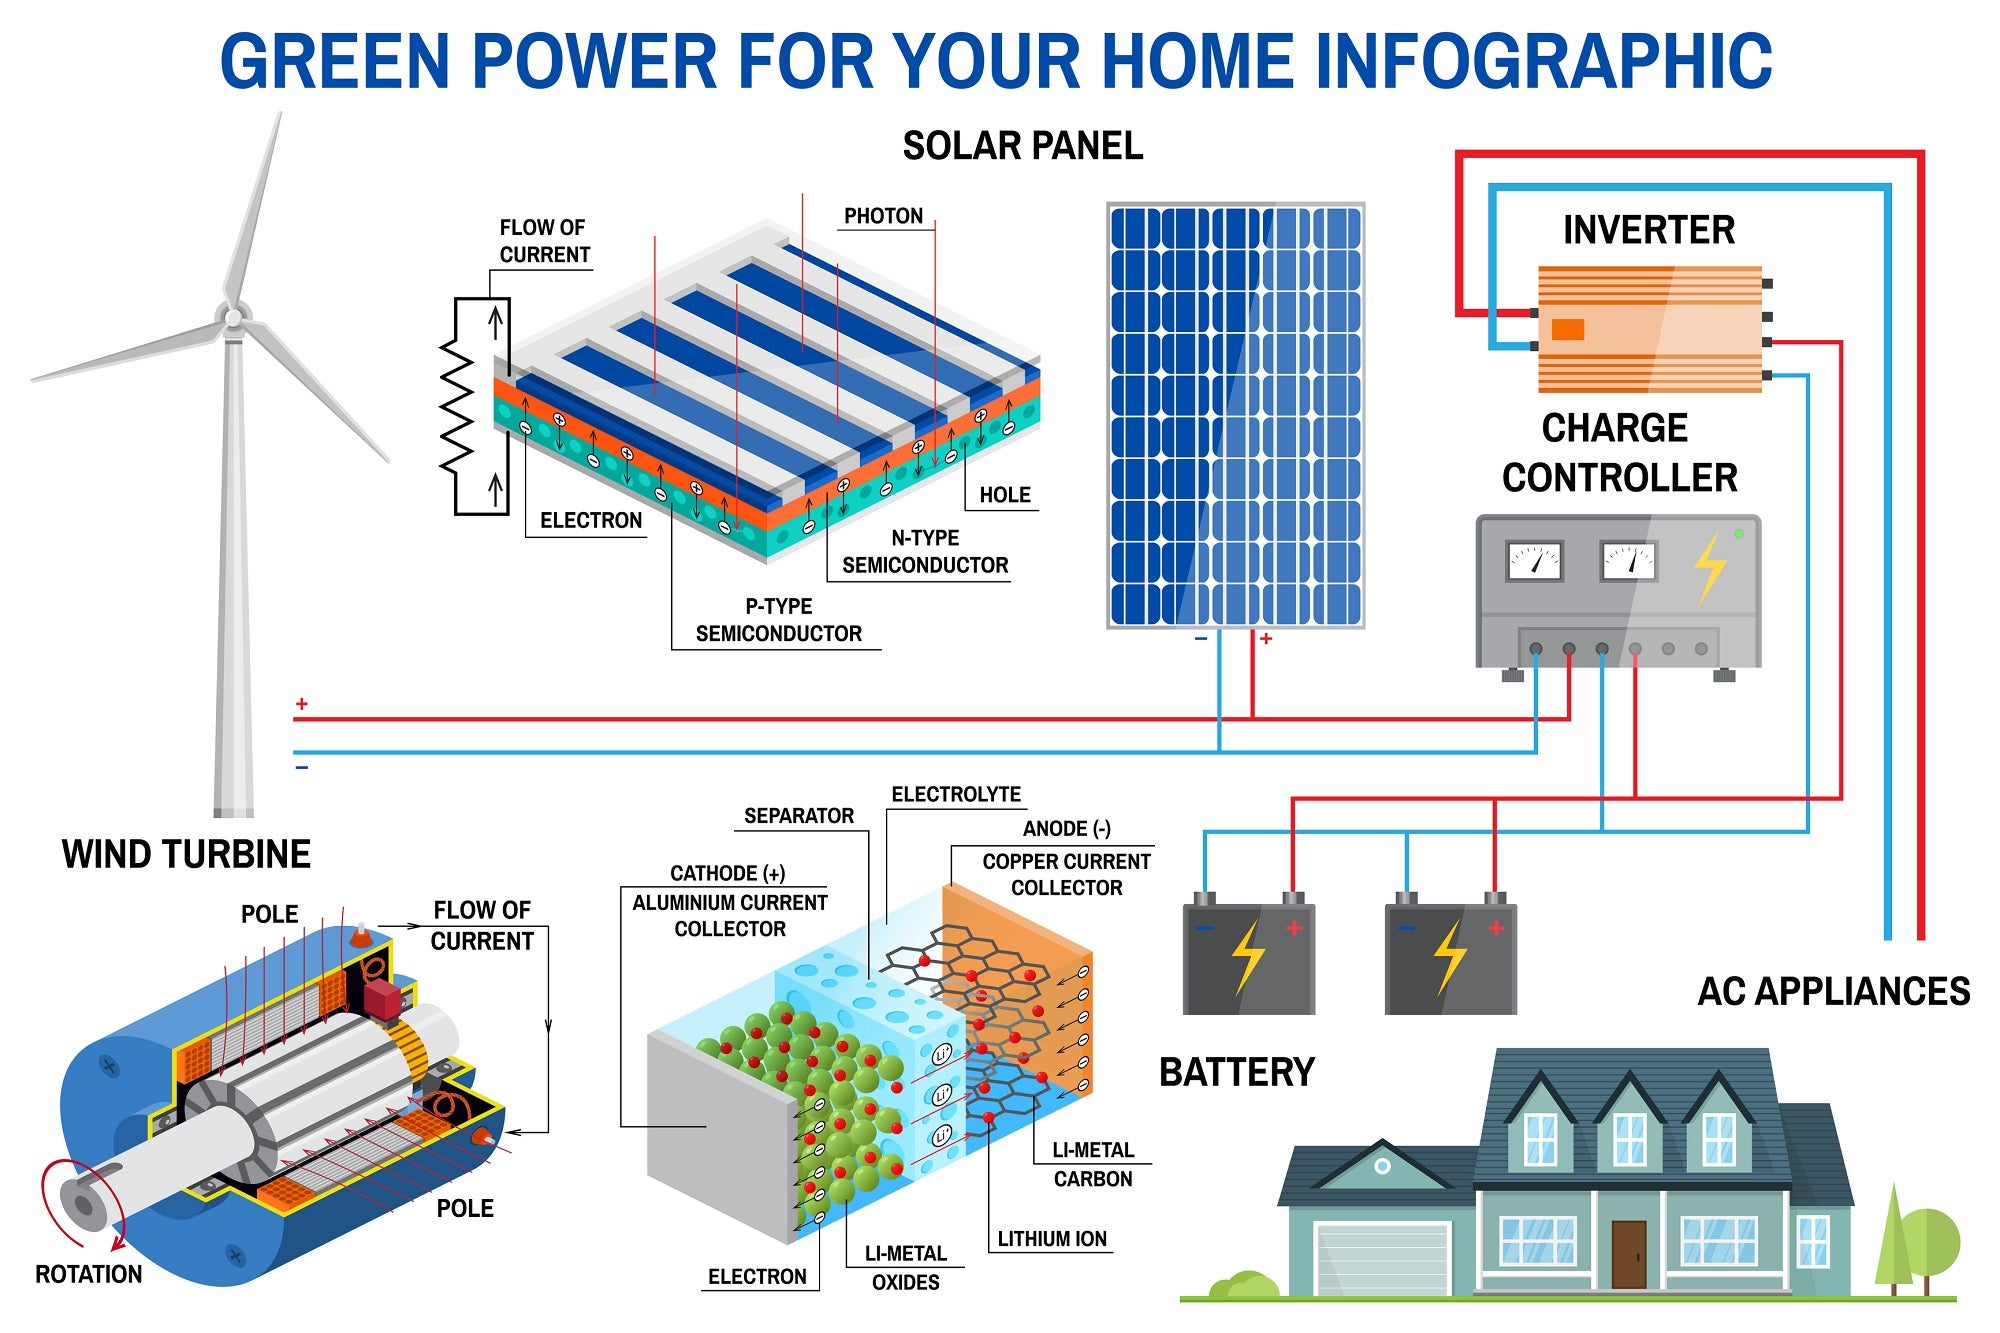 Infographic showing how residential solar power works